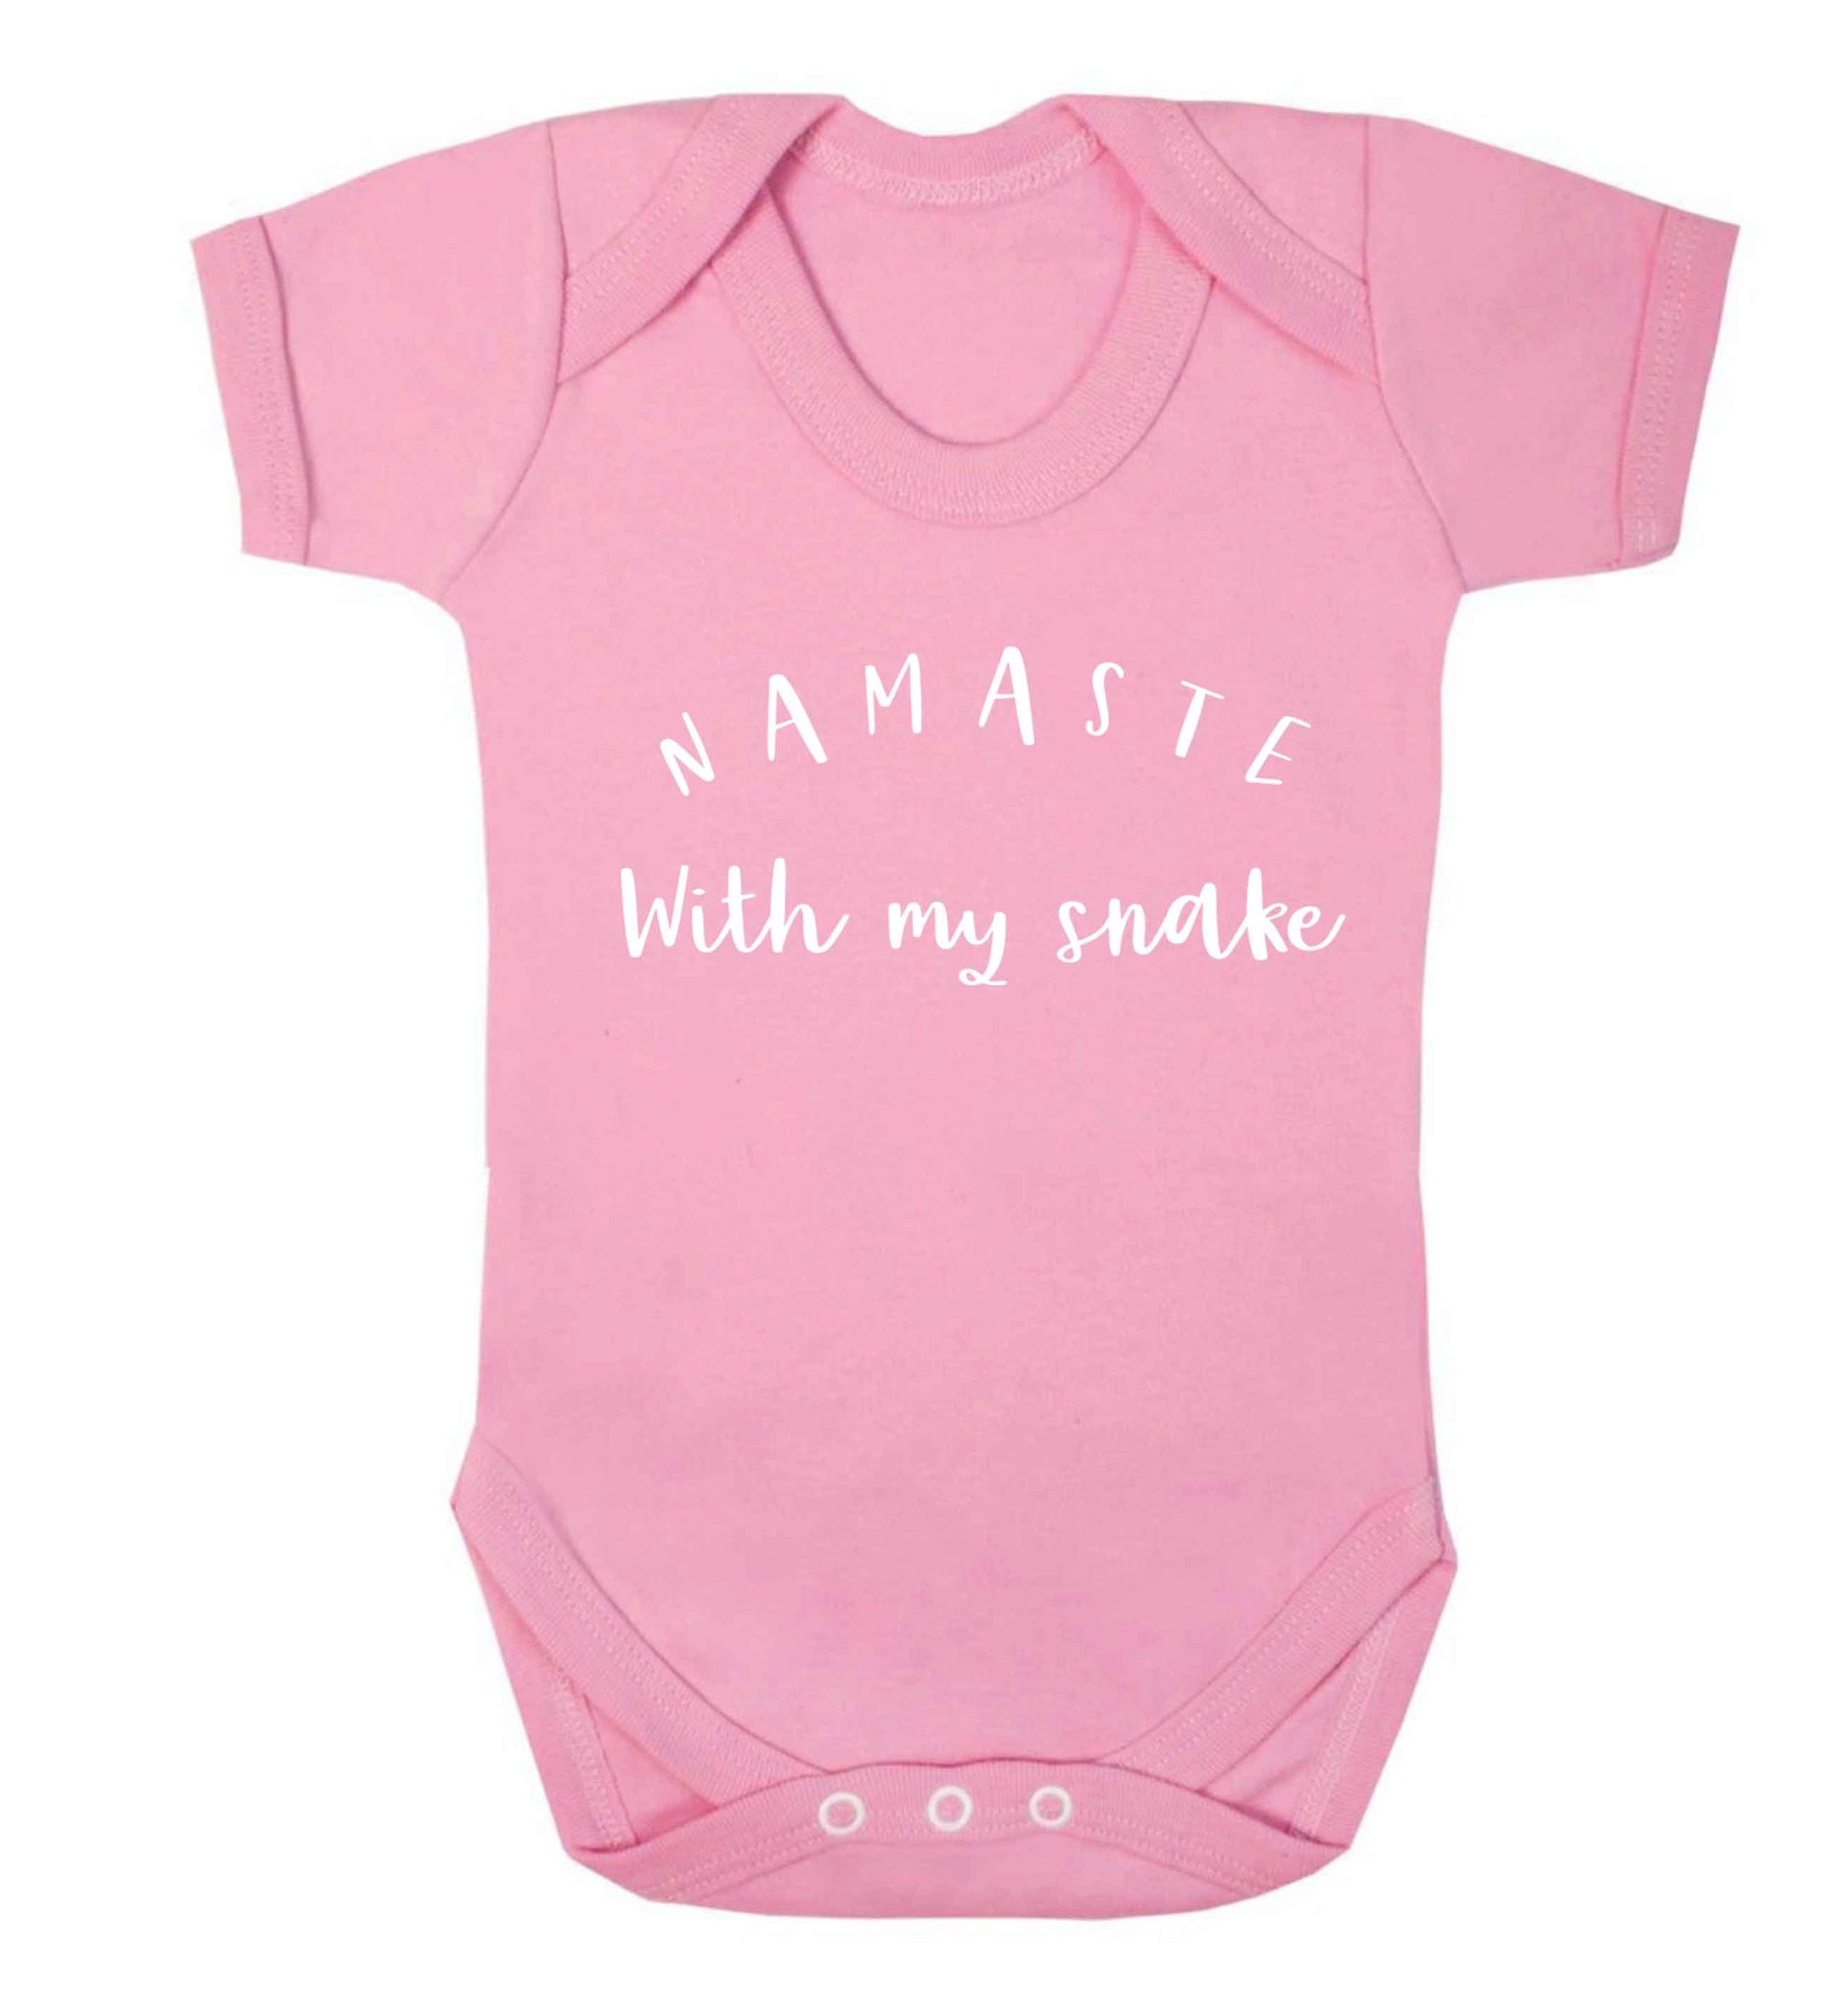 Namaste with my snake Baby Vest pale pink 18-24 months